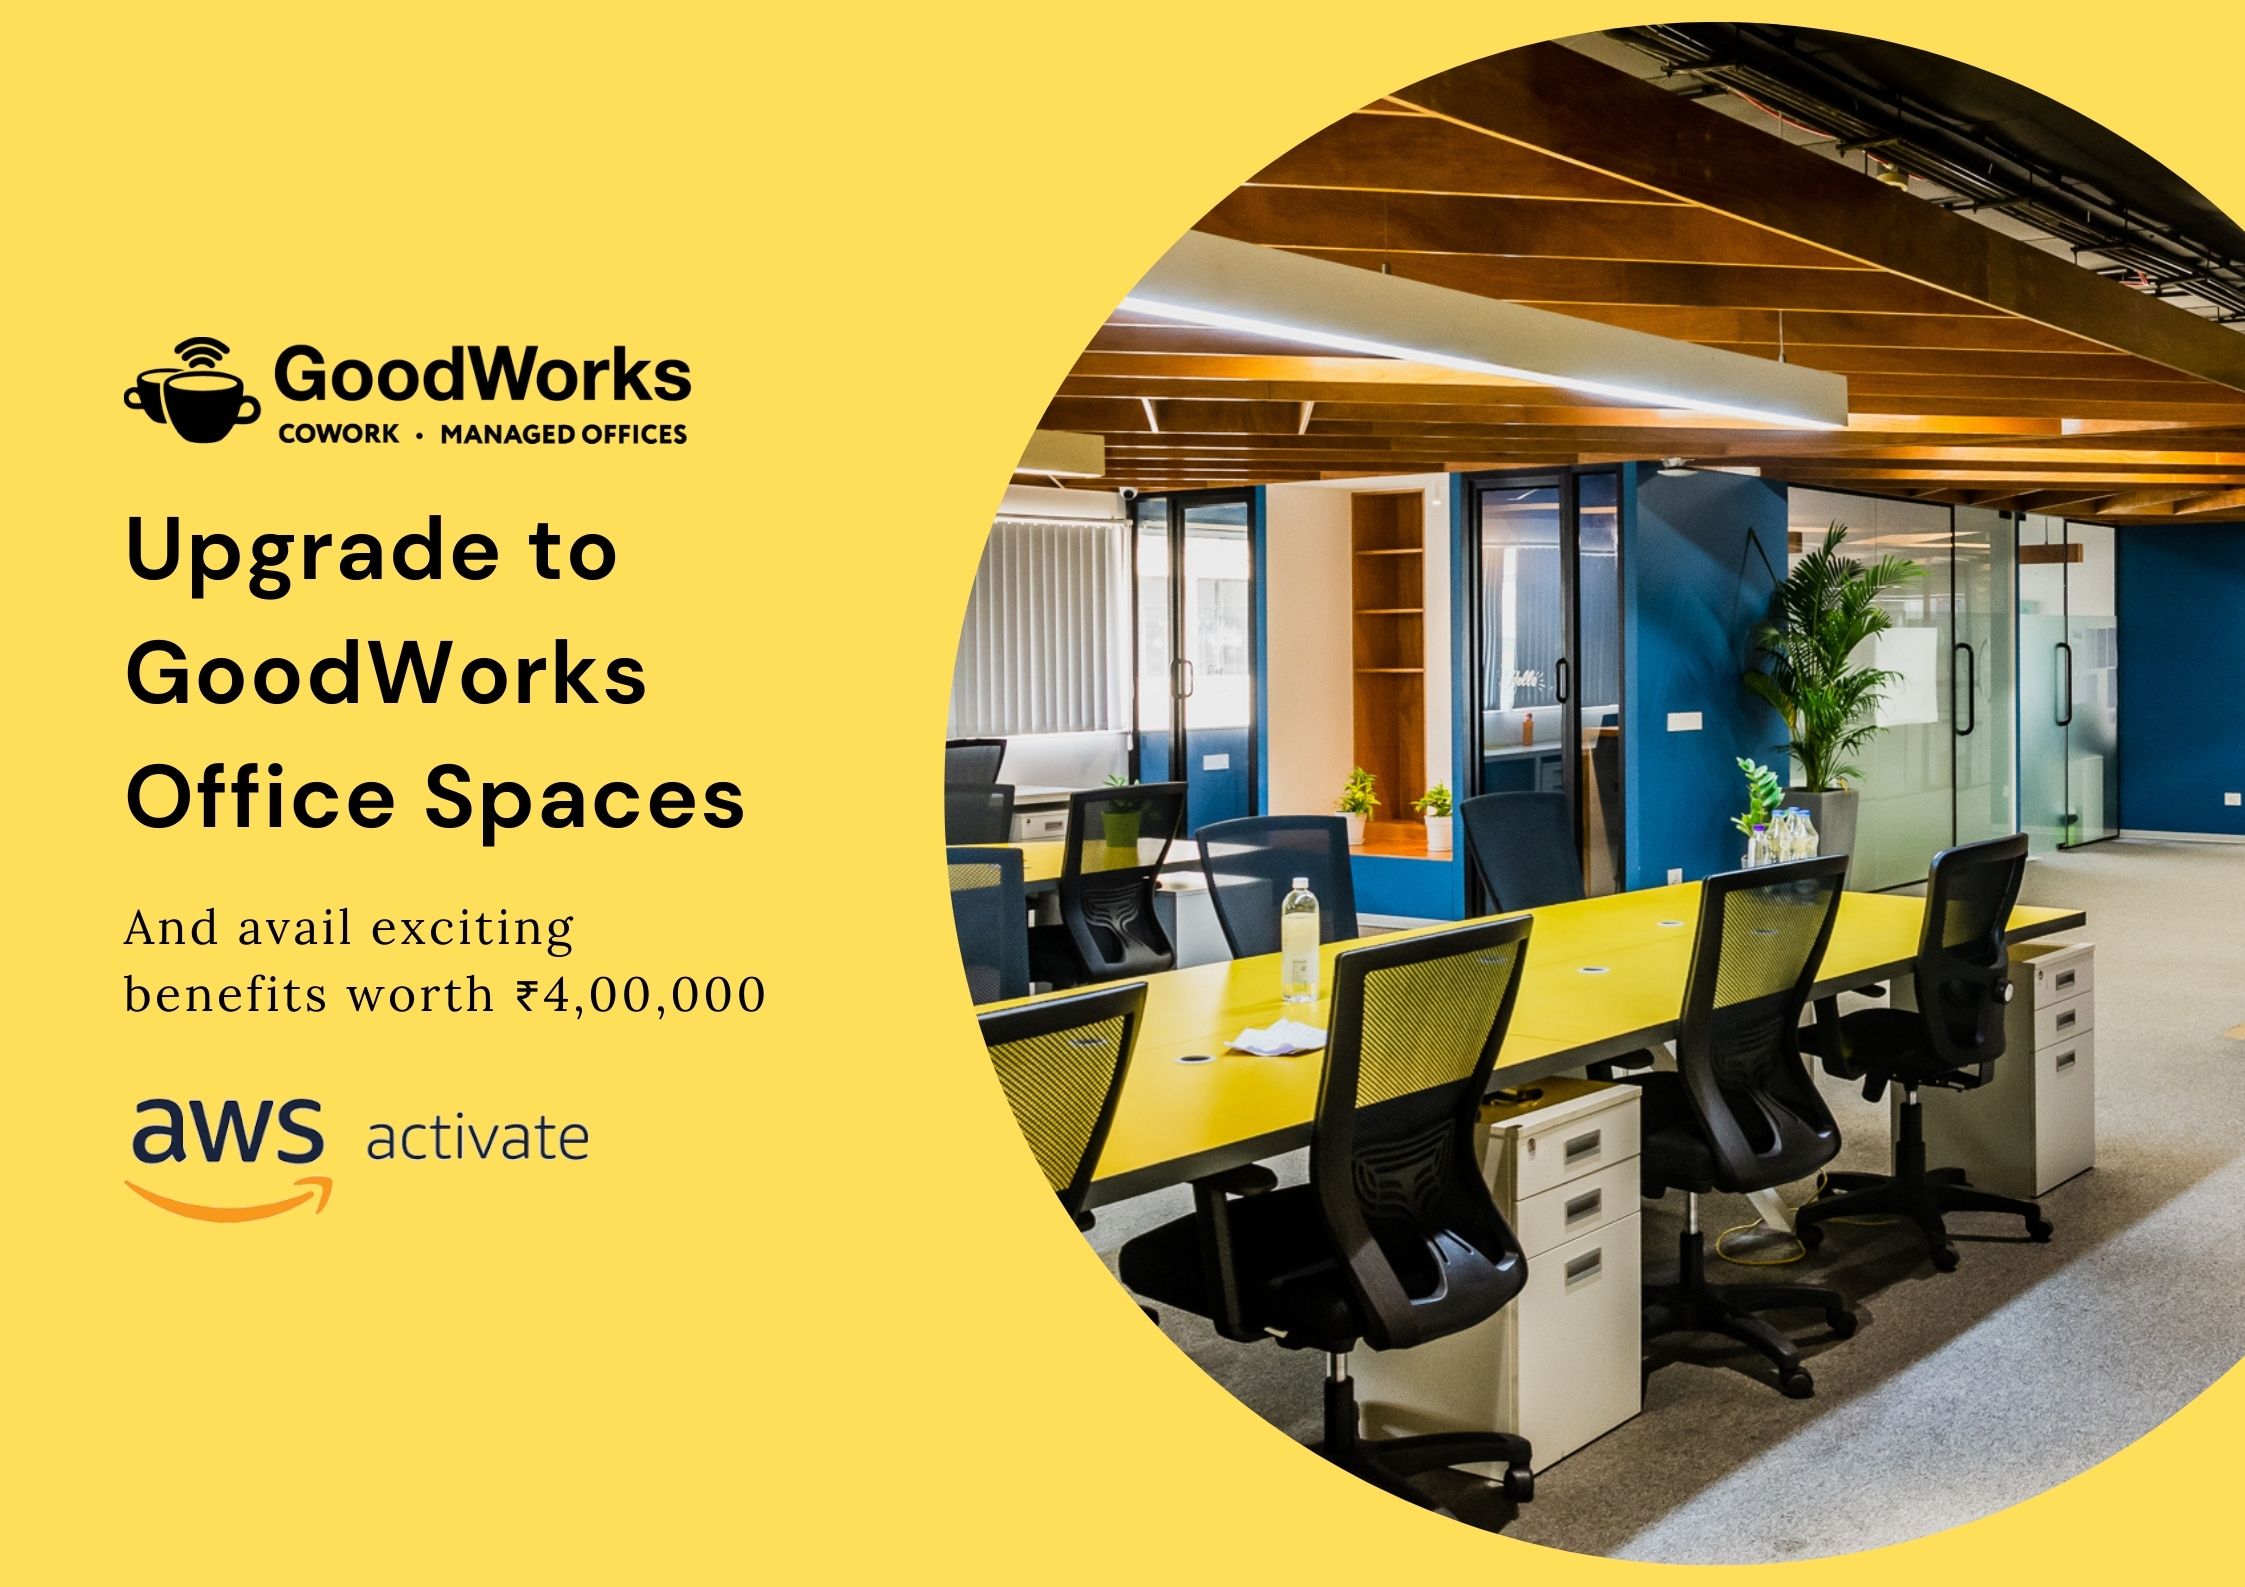 GoodWorks Spaces in partnership with Amazon brings exclusive benefits for  start-ups - GoodWorks Cowork